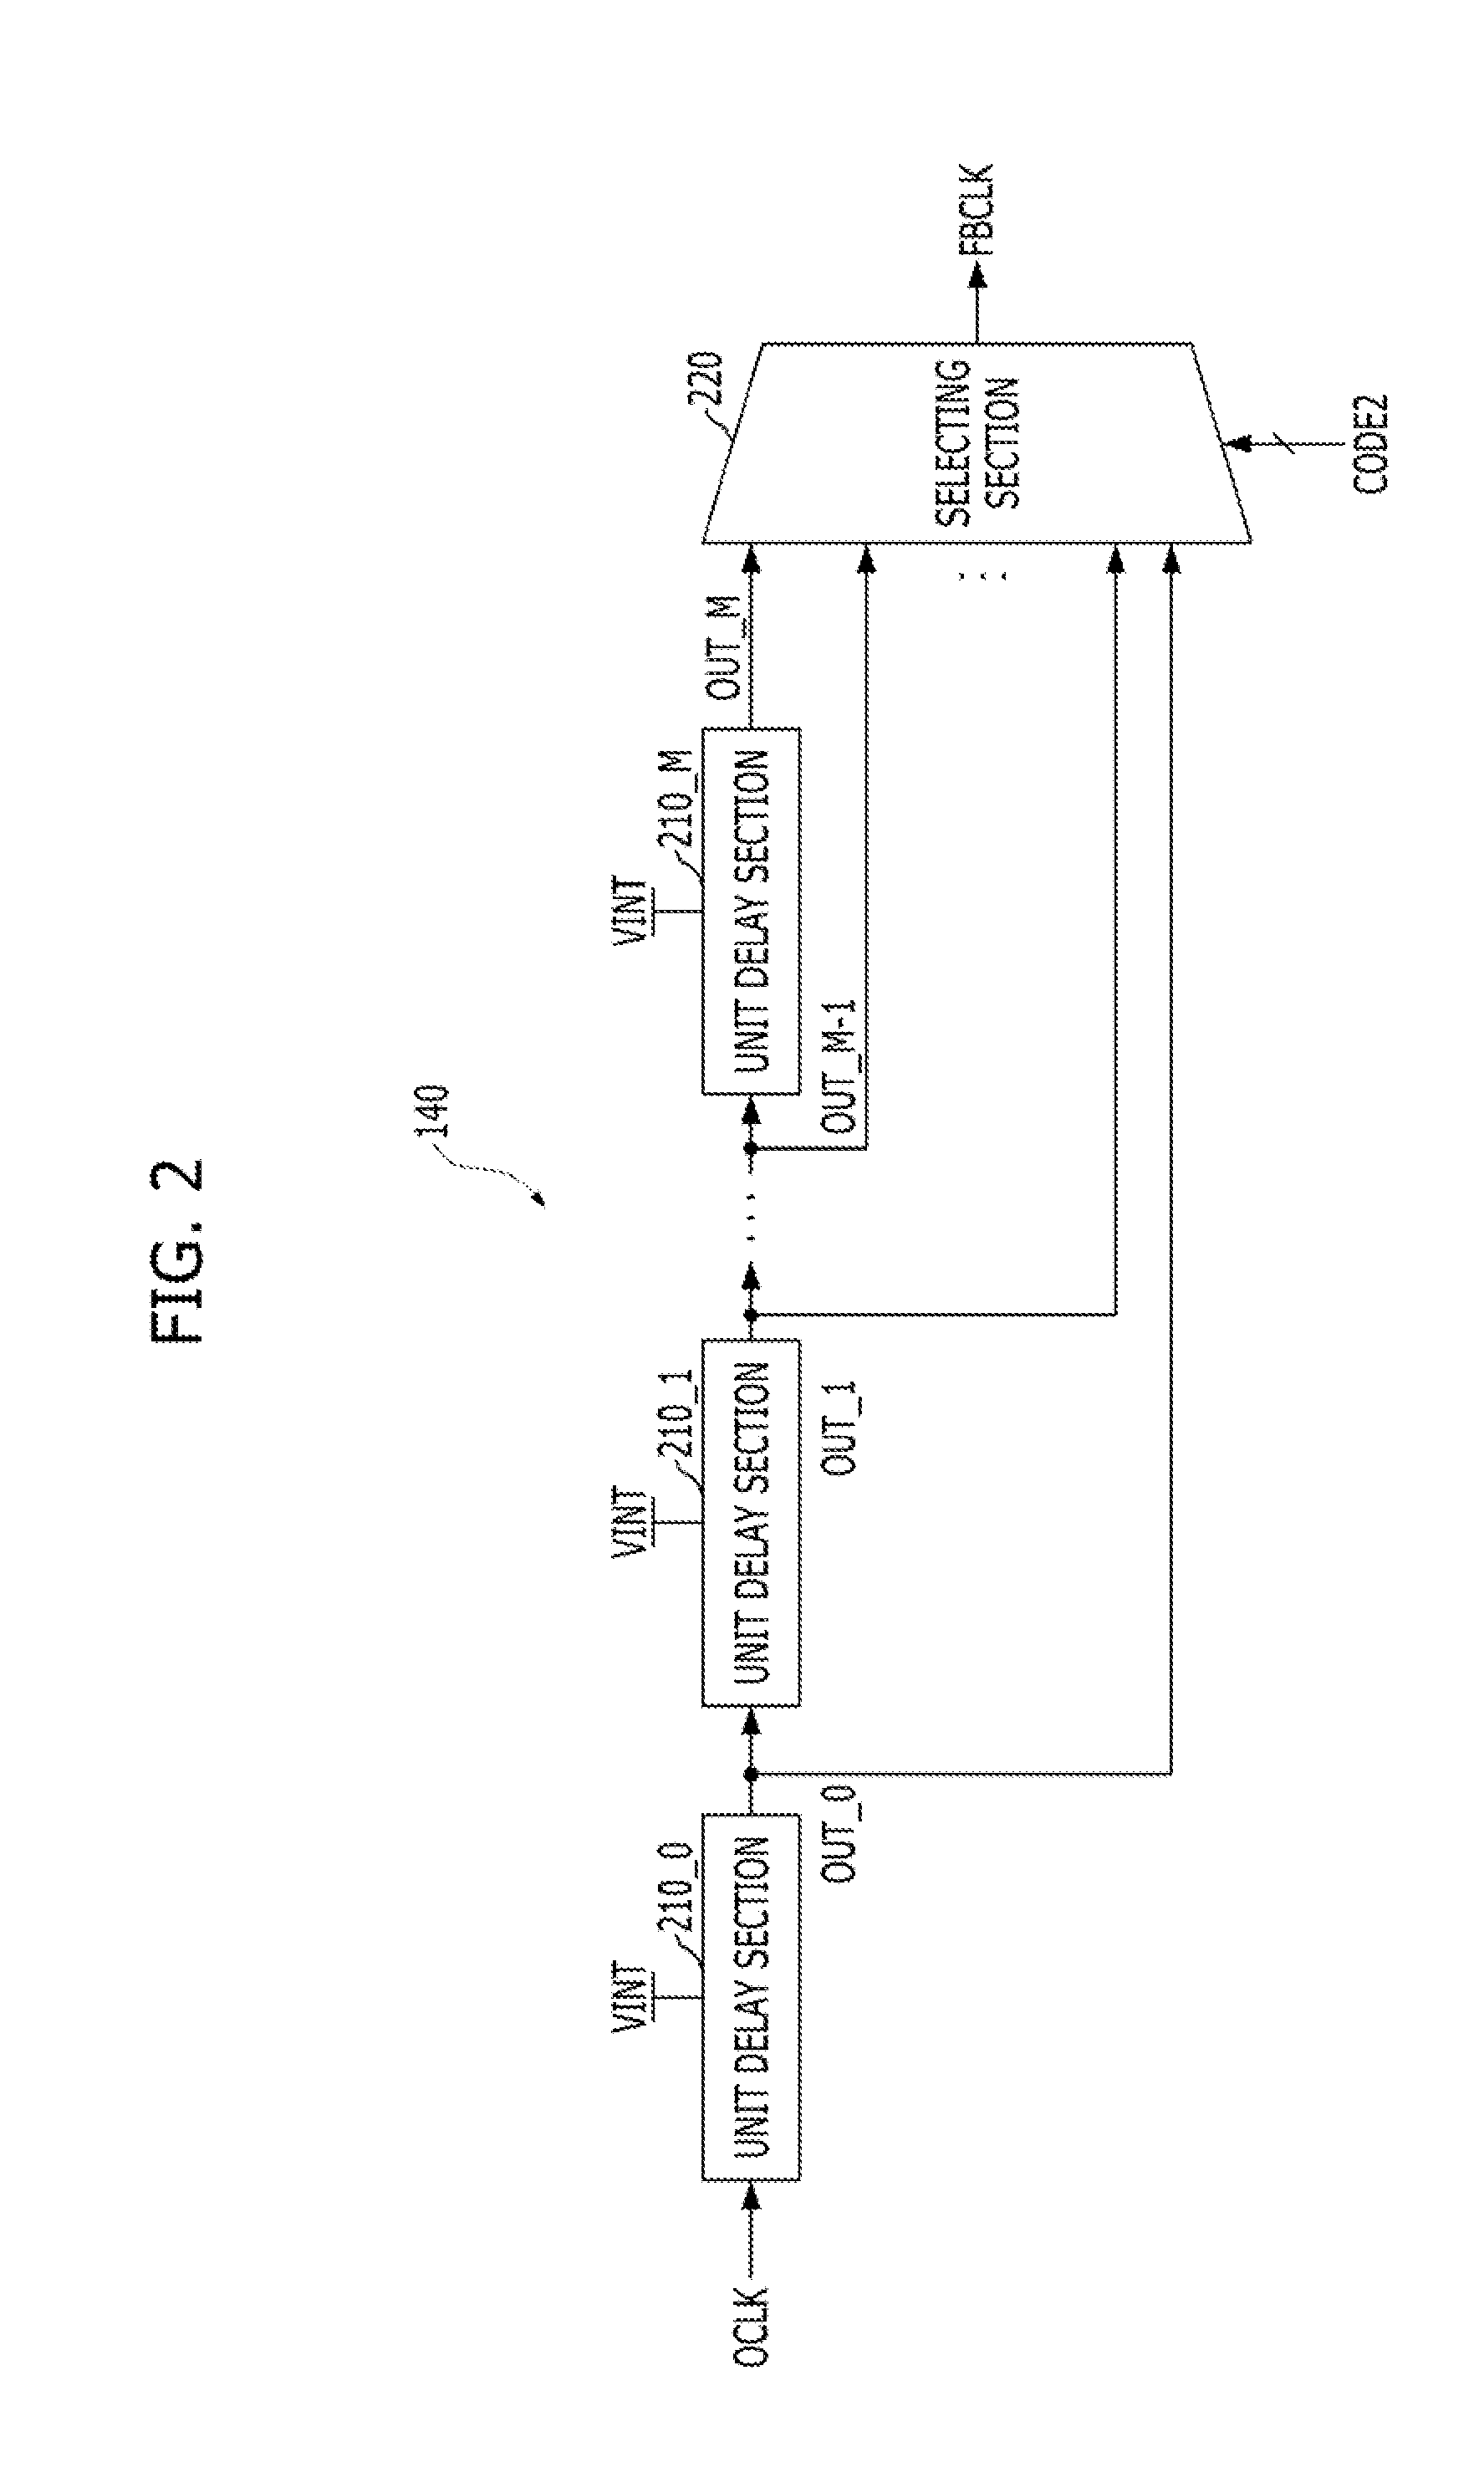 Semiconductor device, semiconductor system and method for operating semiconductor device